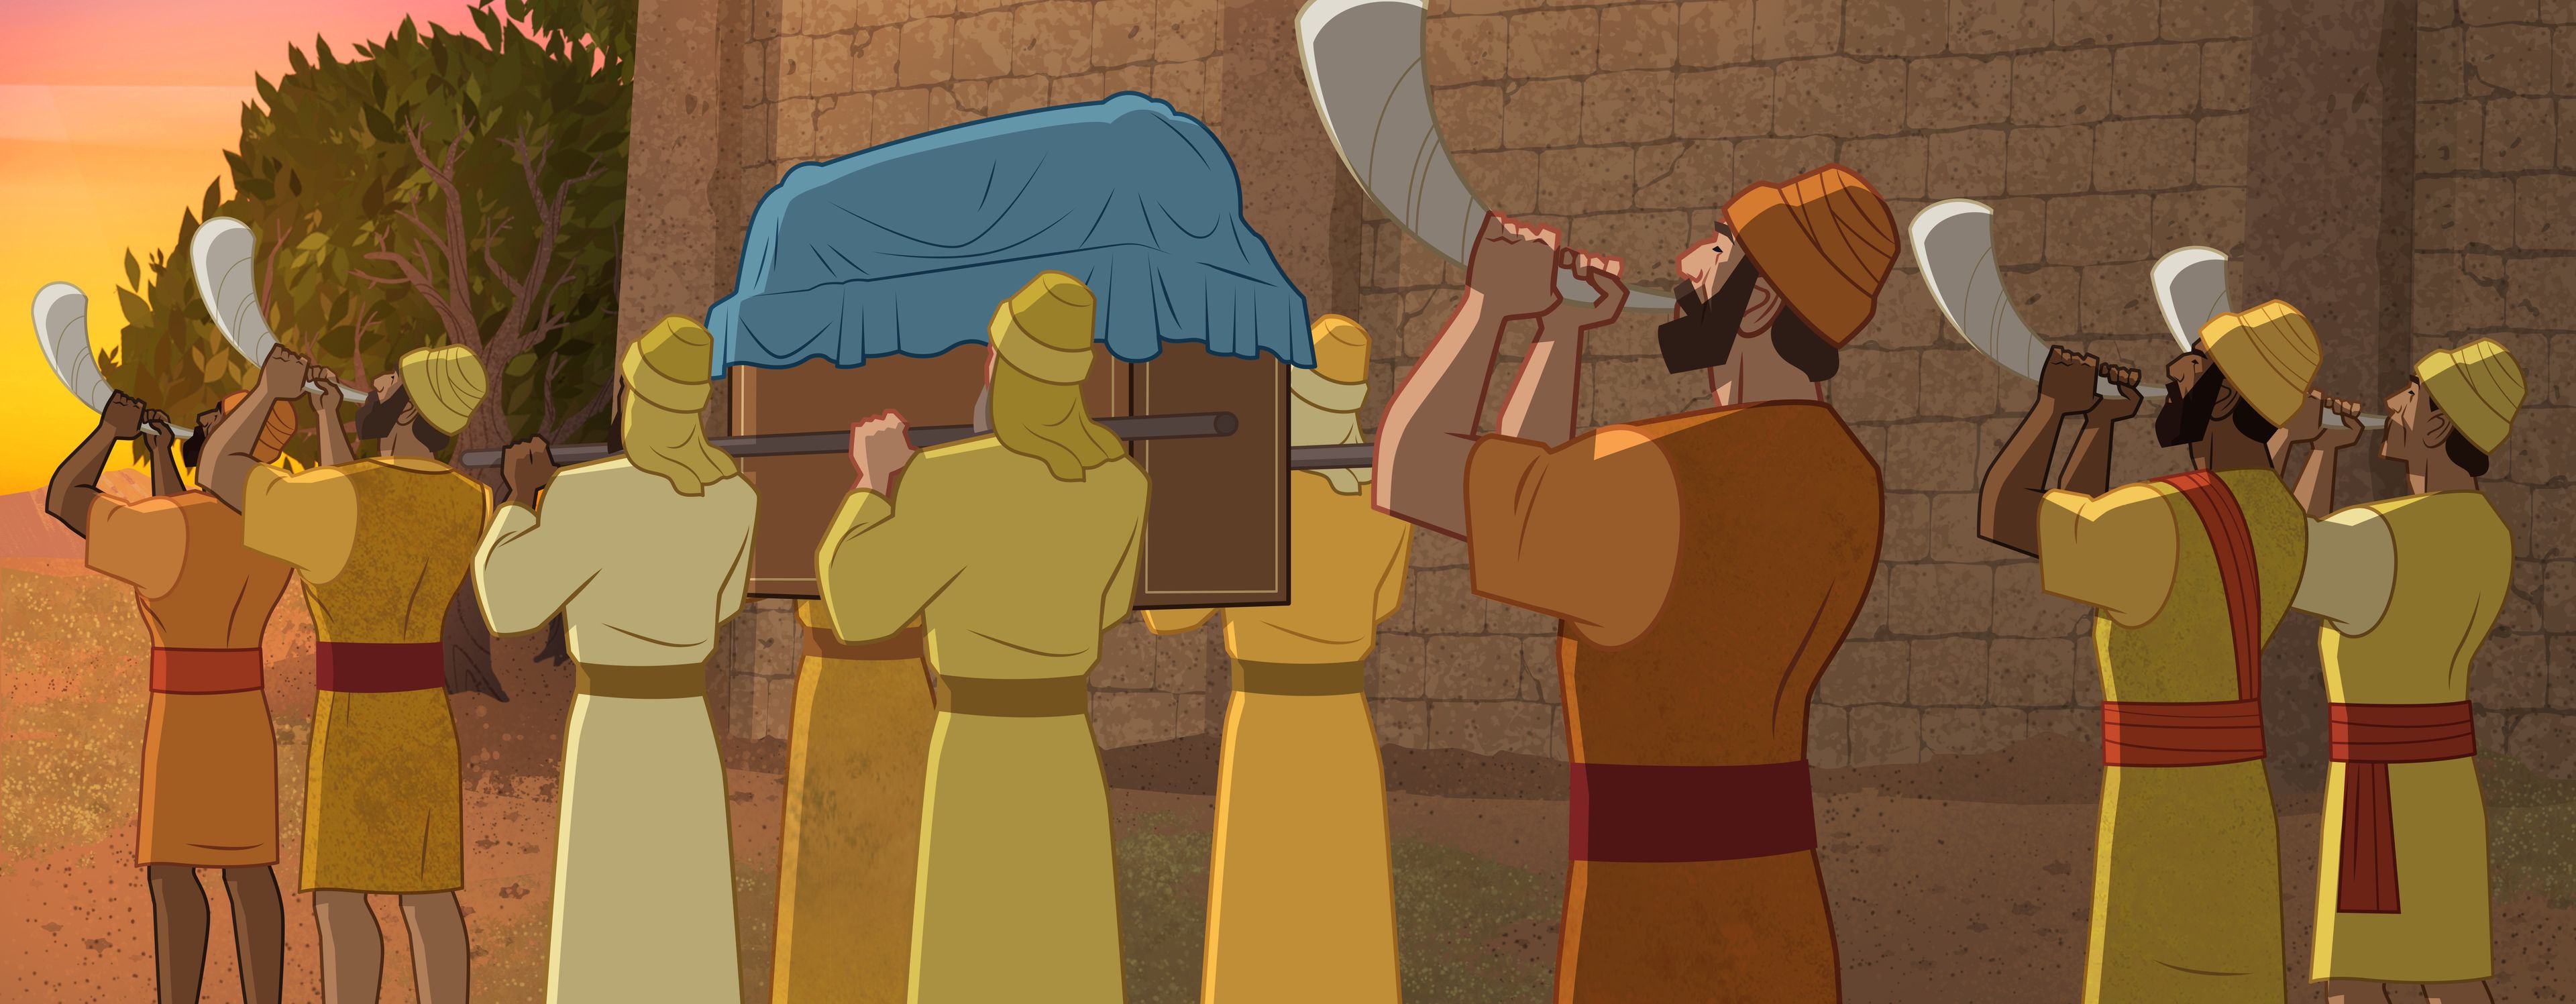 Illustration of priests carrying ark of the covenant, others blowing horns. Joshua 6:6–14